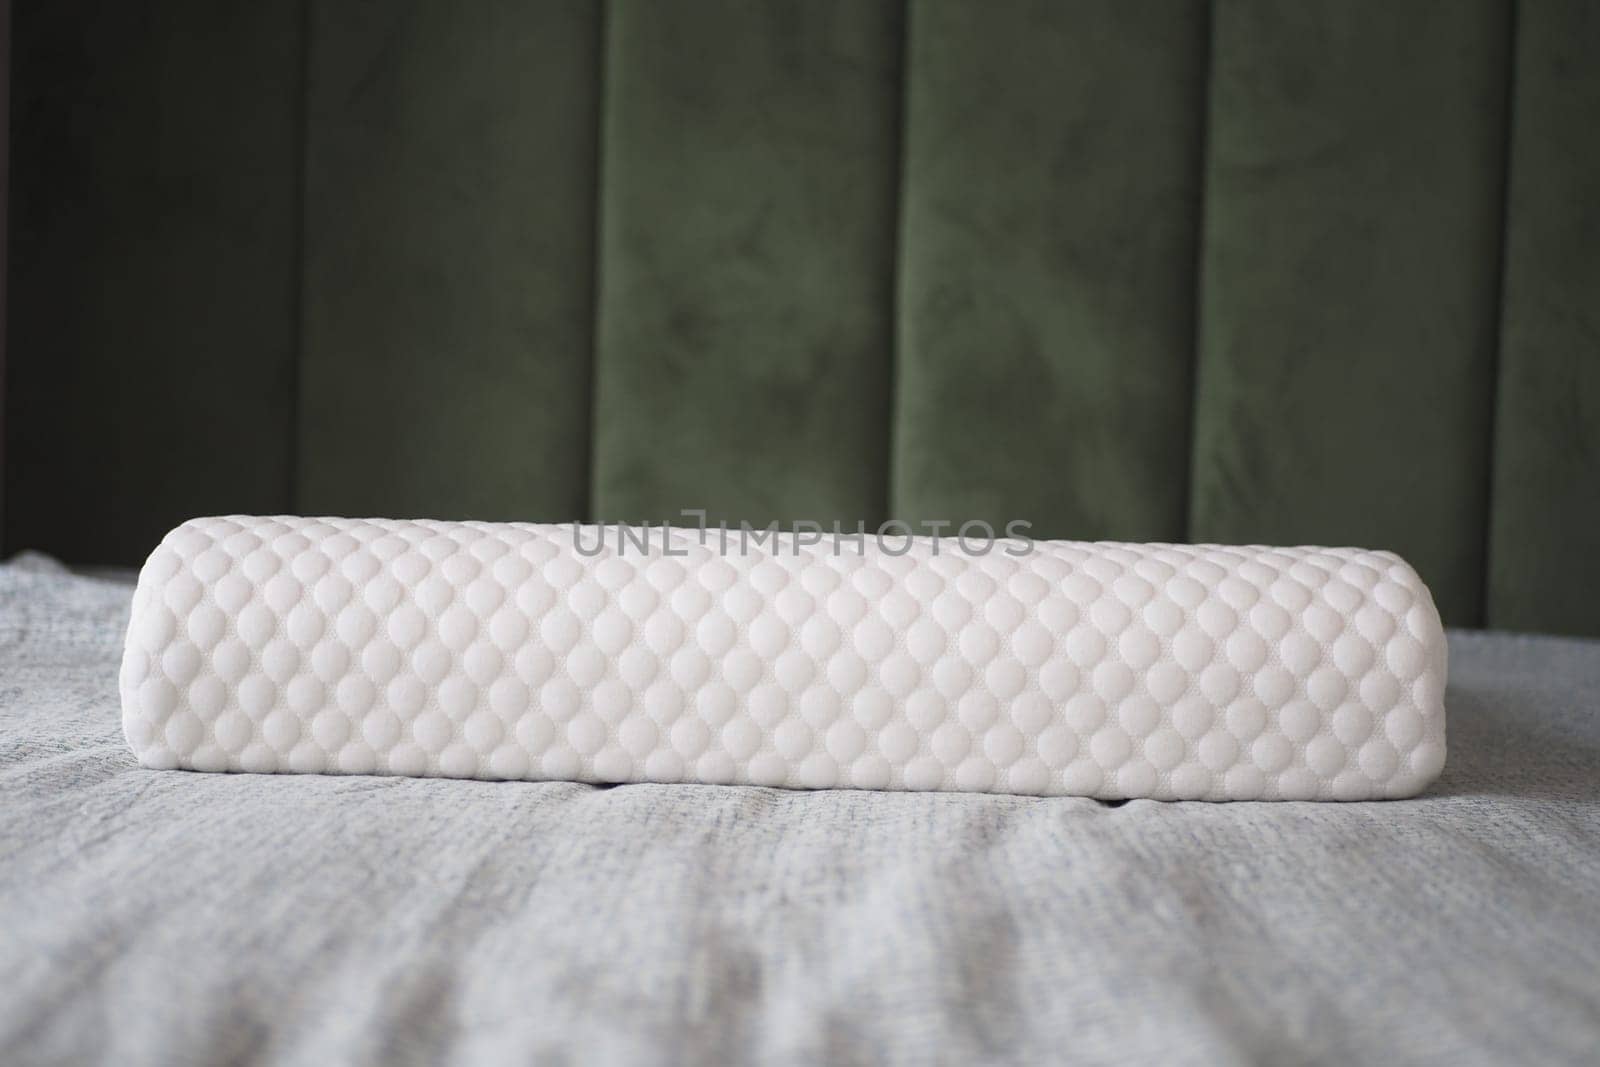 Orthopedic pillow on a bed ,